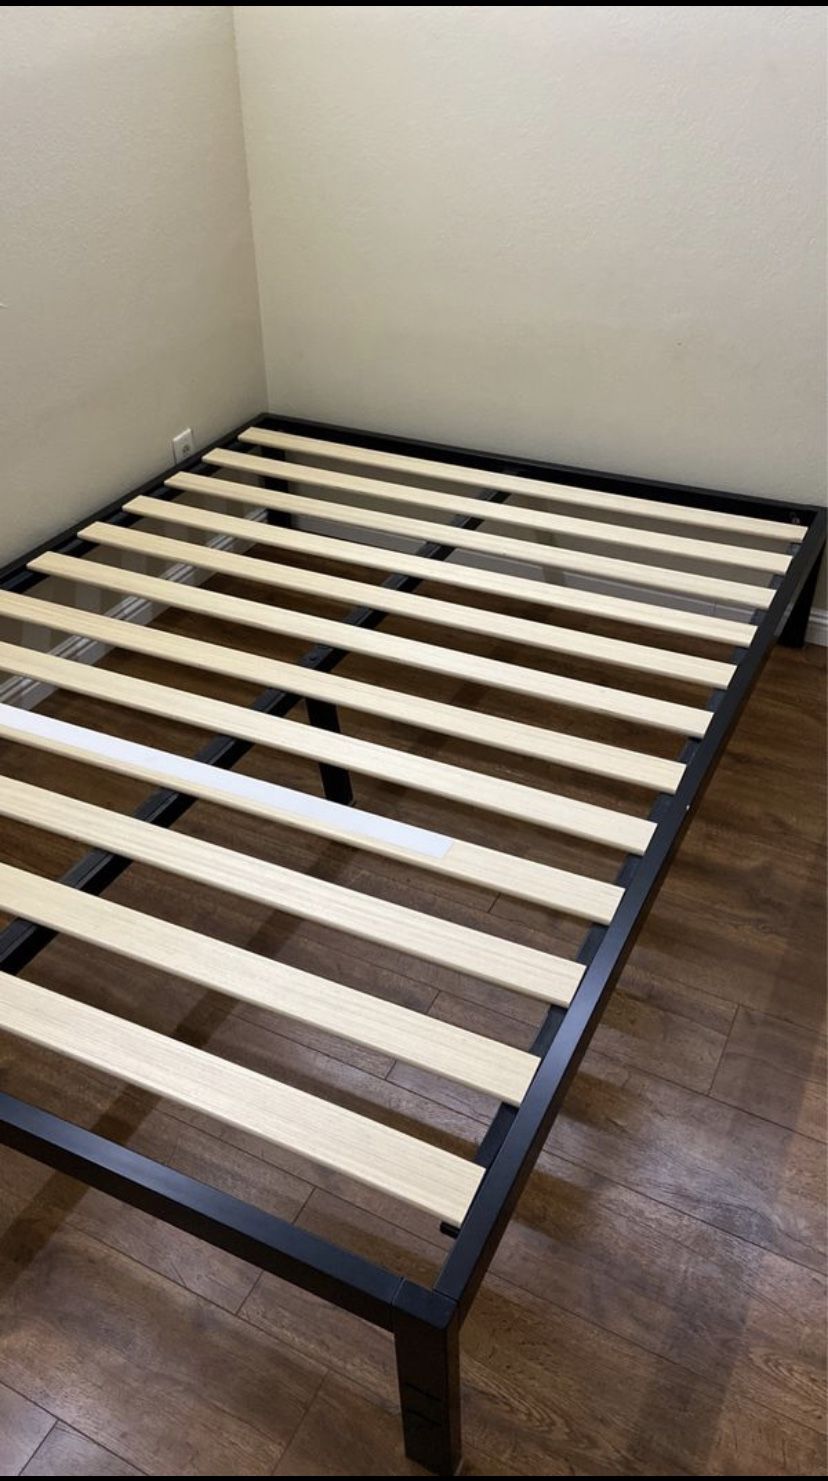 Queen size base free